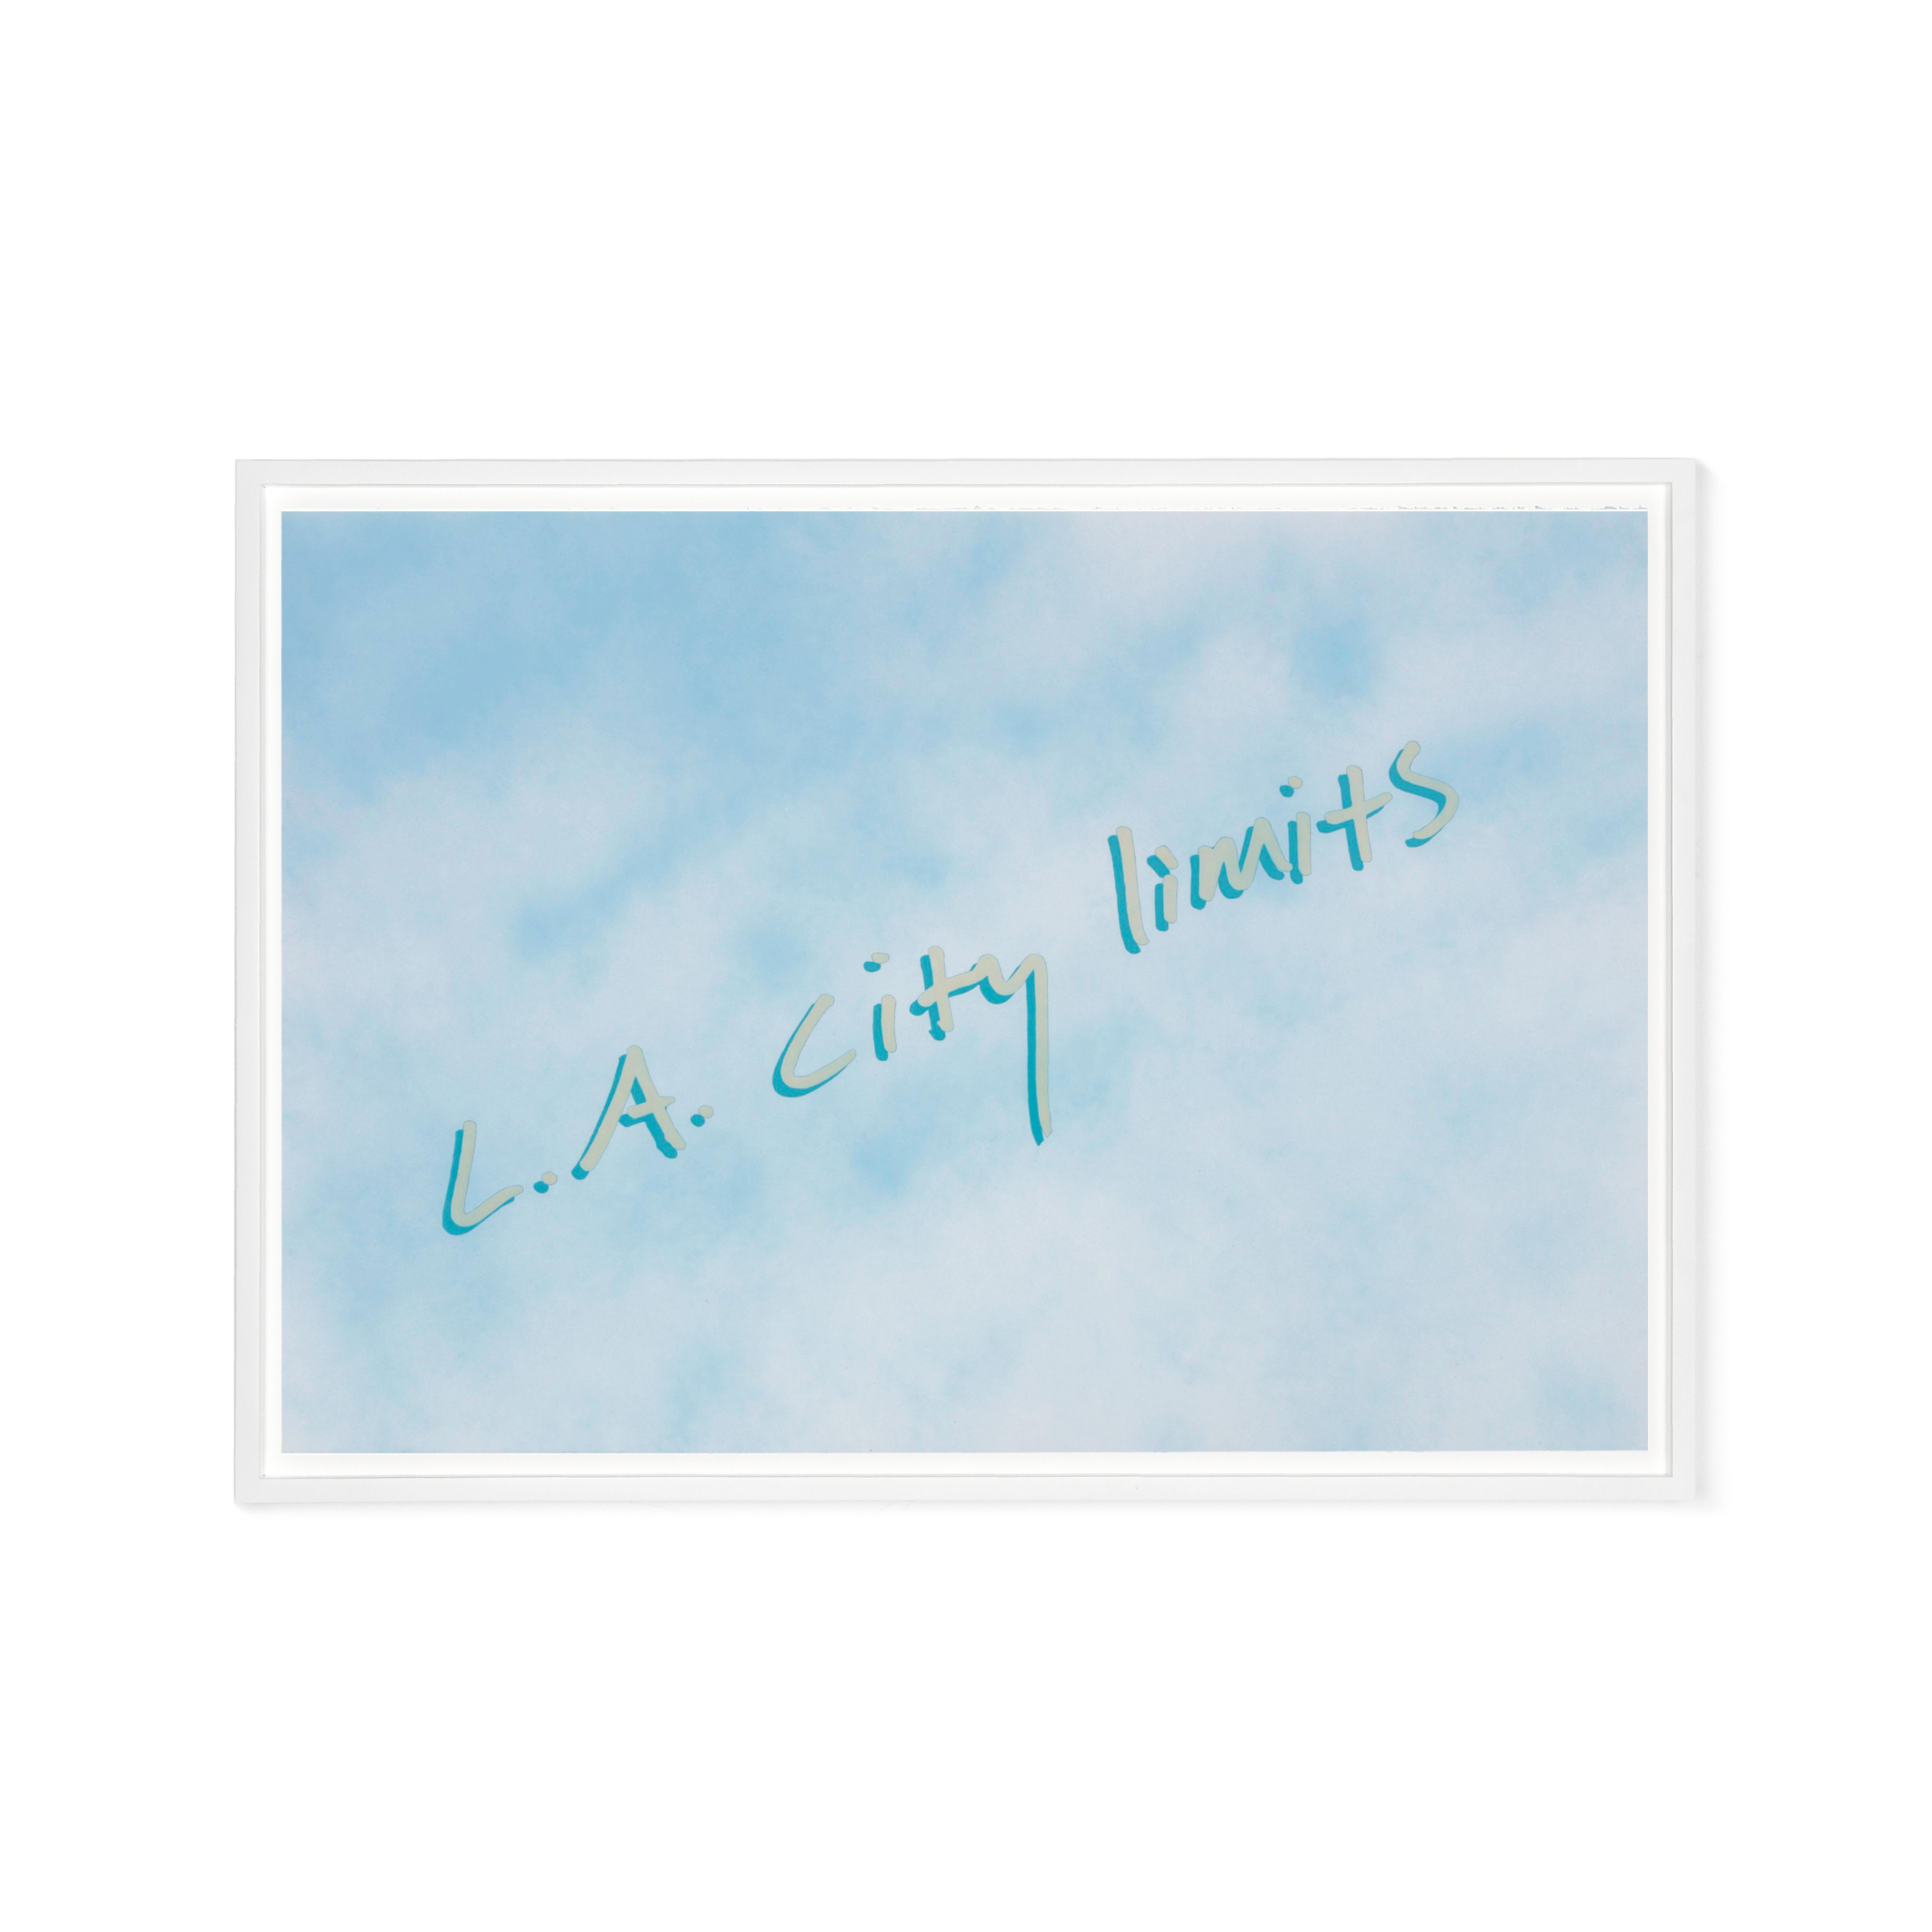 Untitled (L.A. city limits), Contemporary Painting On Paper, 2017 For Sale 1